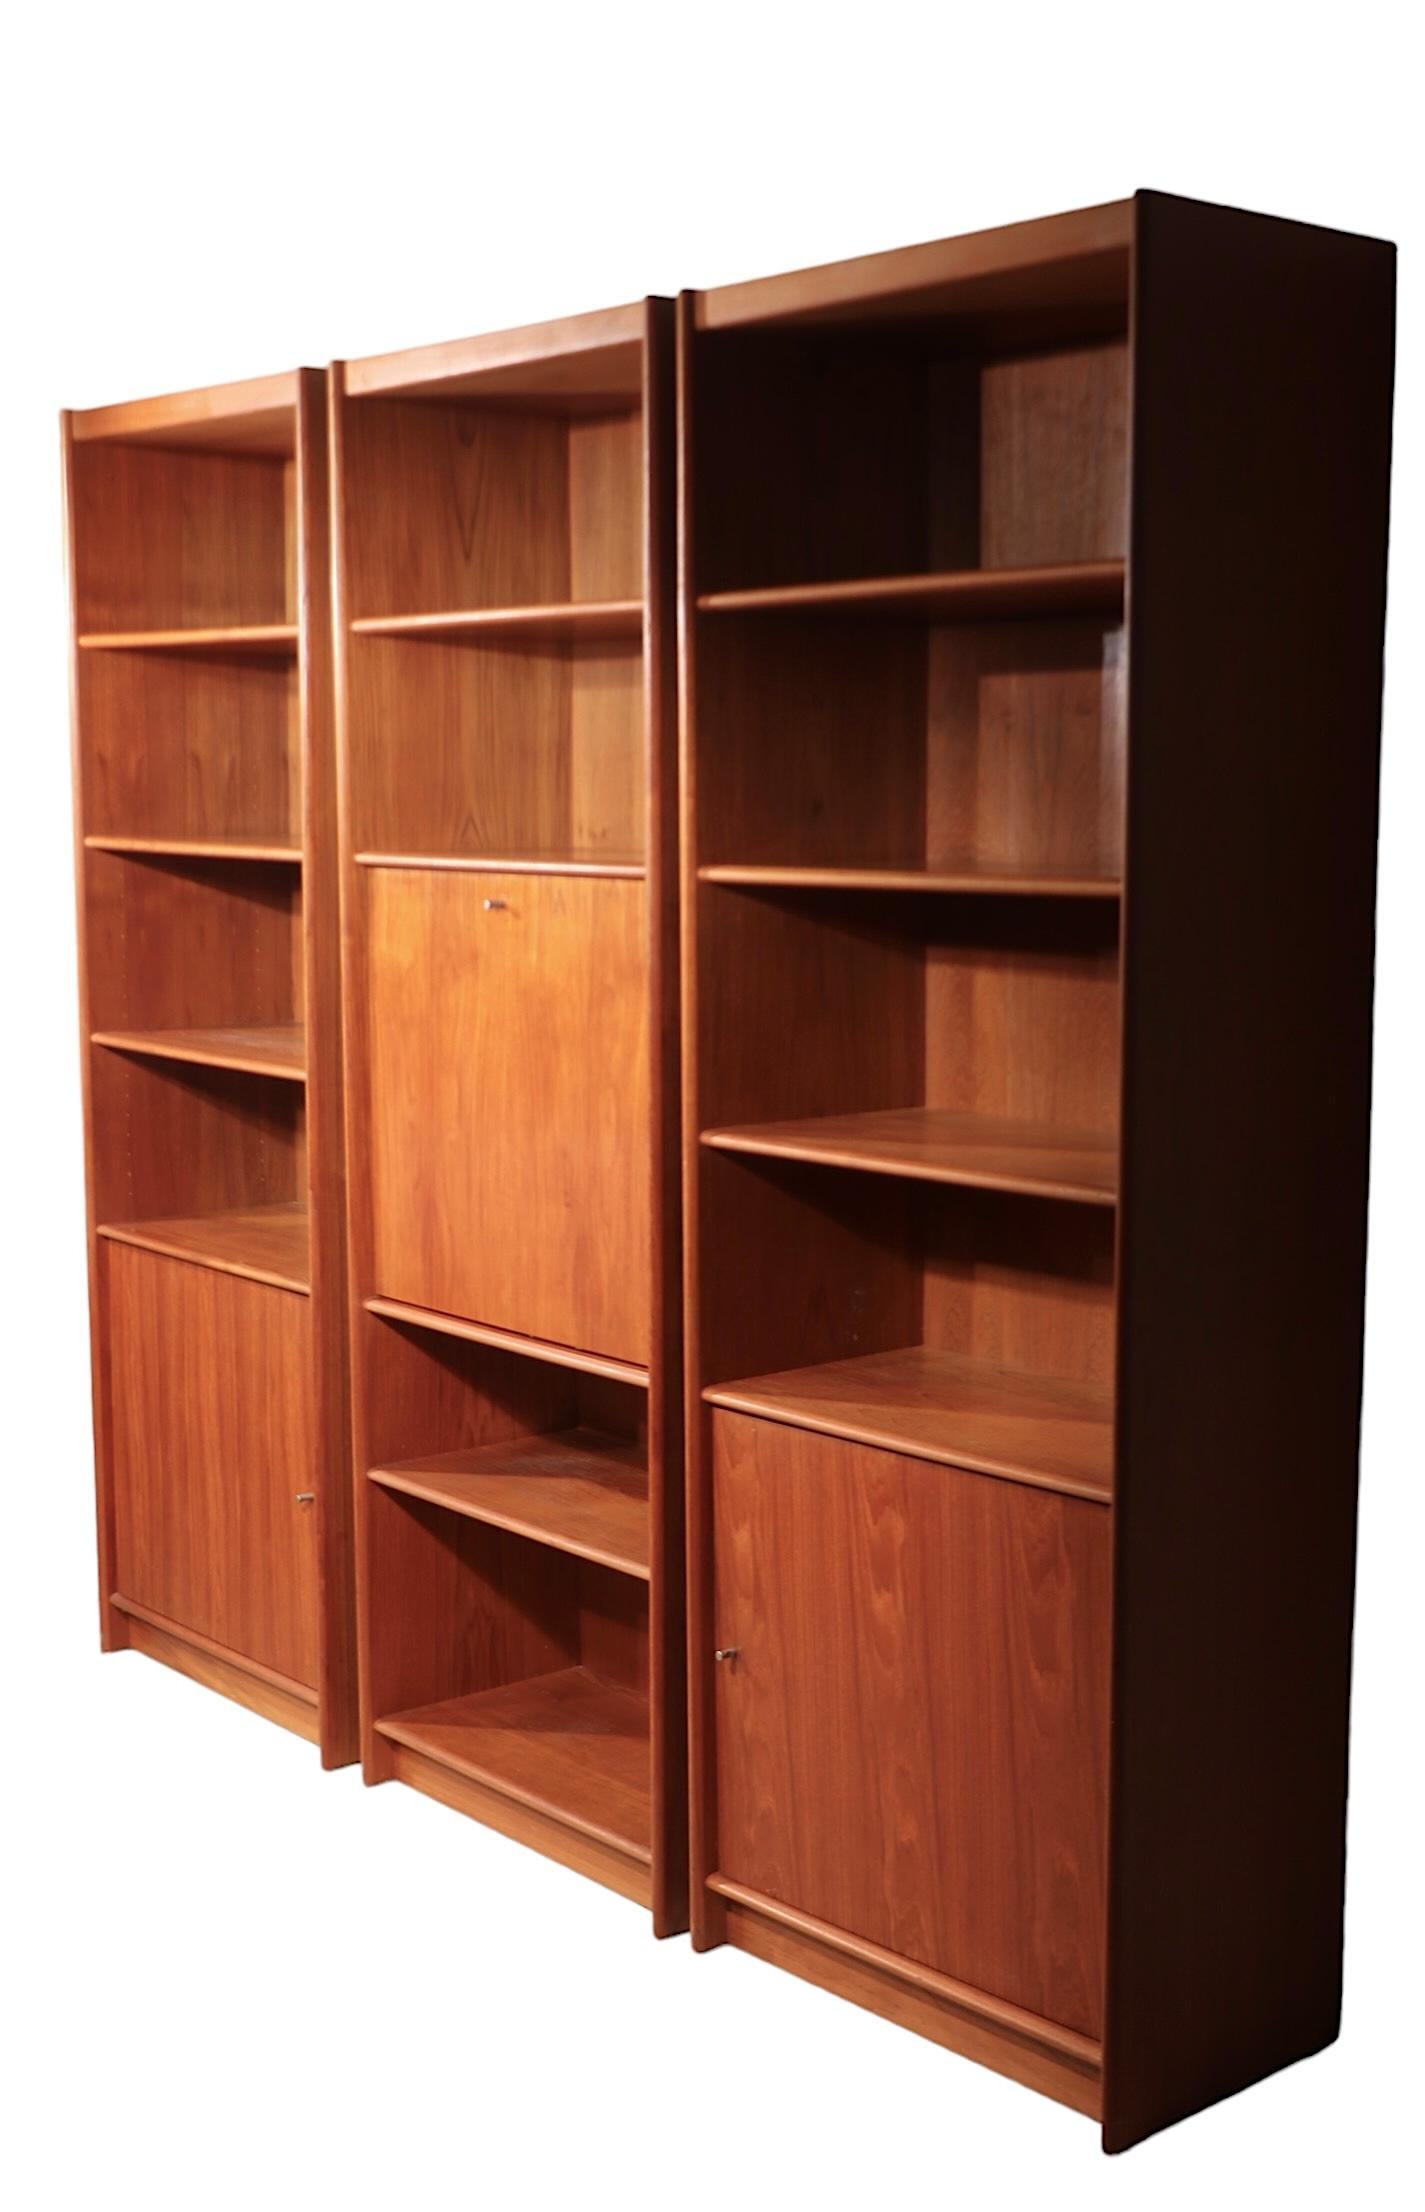 Exceptional freestanding wall unit, bookcase, fall front desk, constructed of teak, teak veneer, and aluminum. The set consists of three separate units, two with bookshelf tops over a one door cabinet, and the middle section, which has shelves above